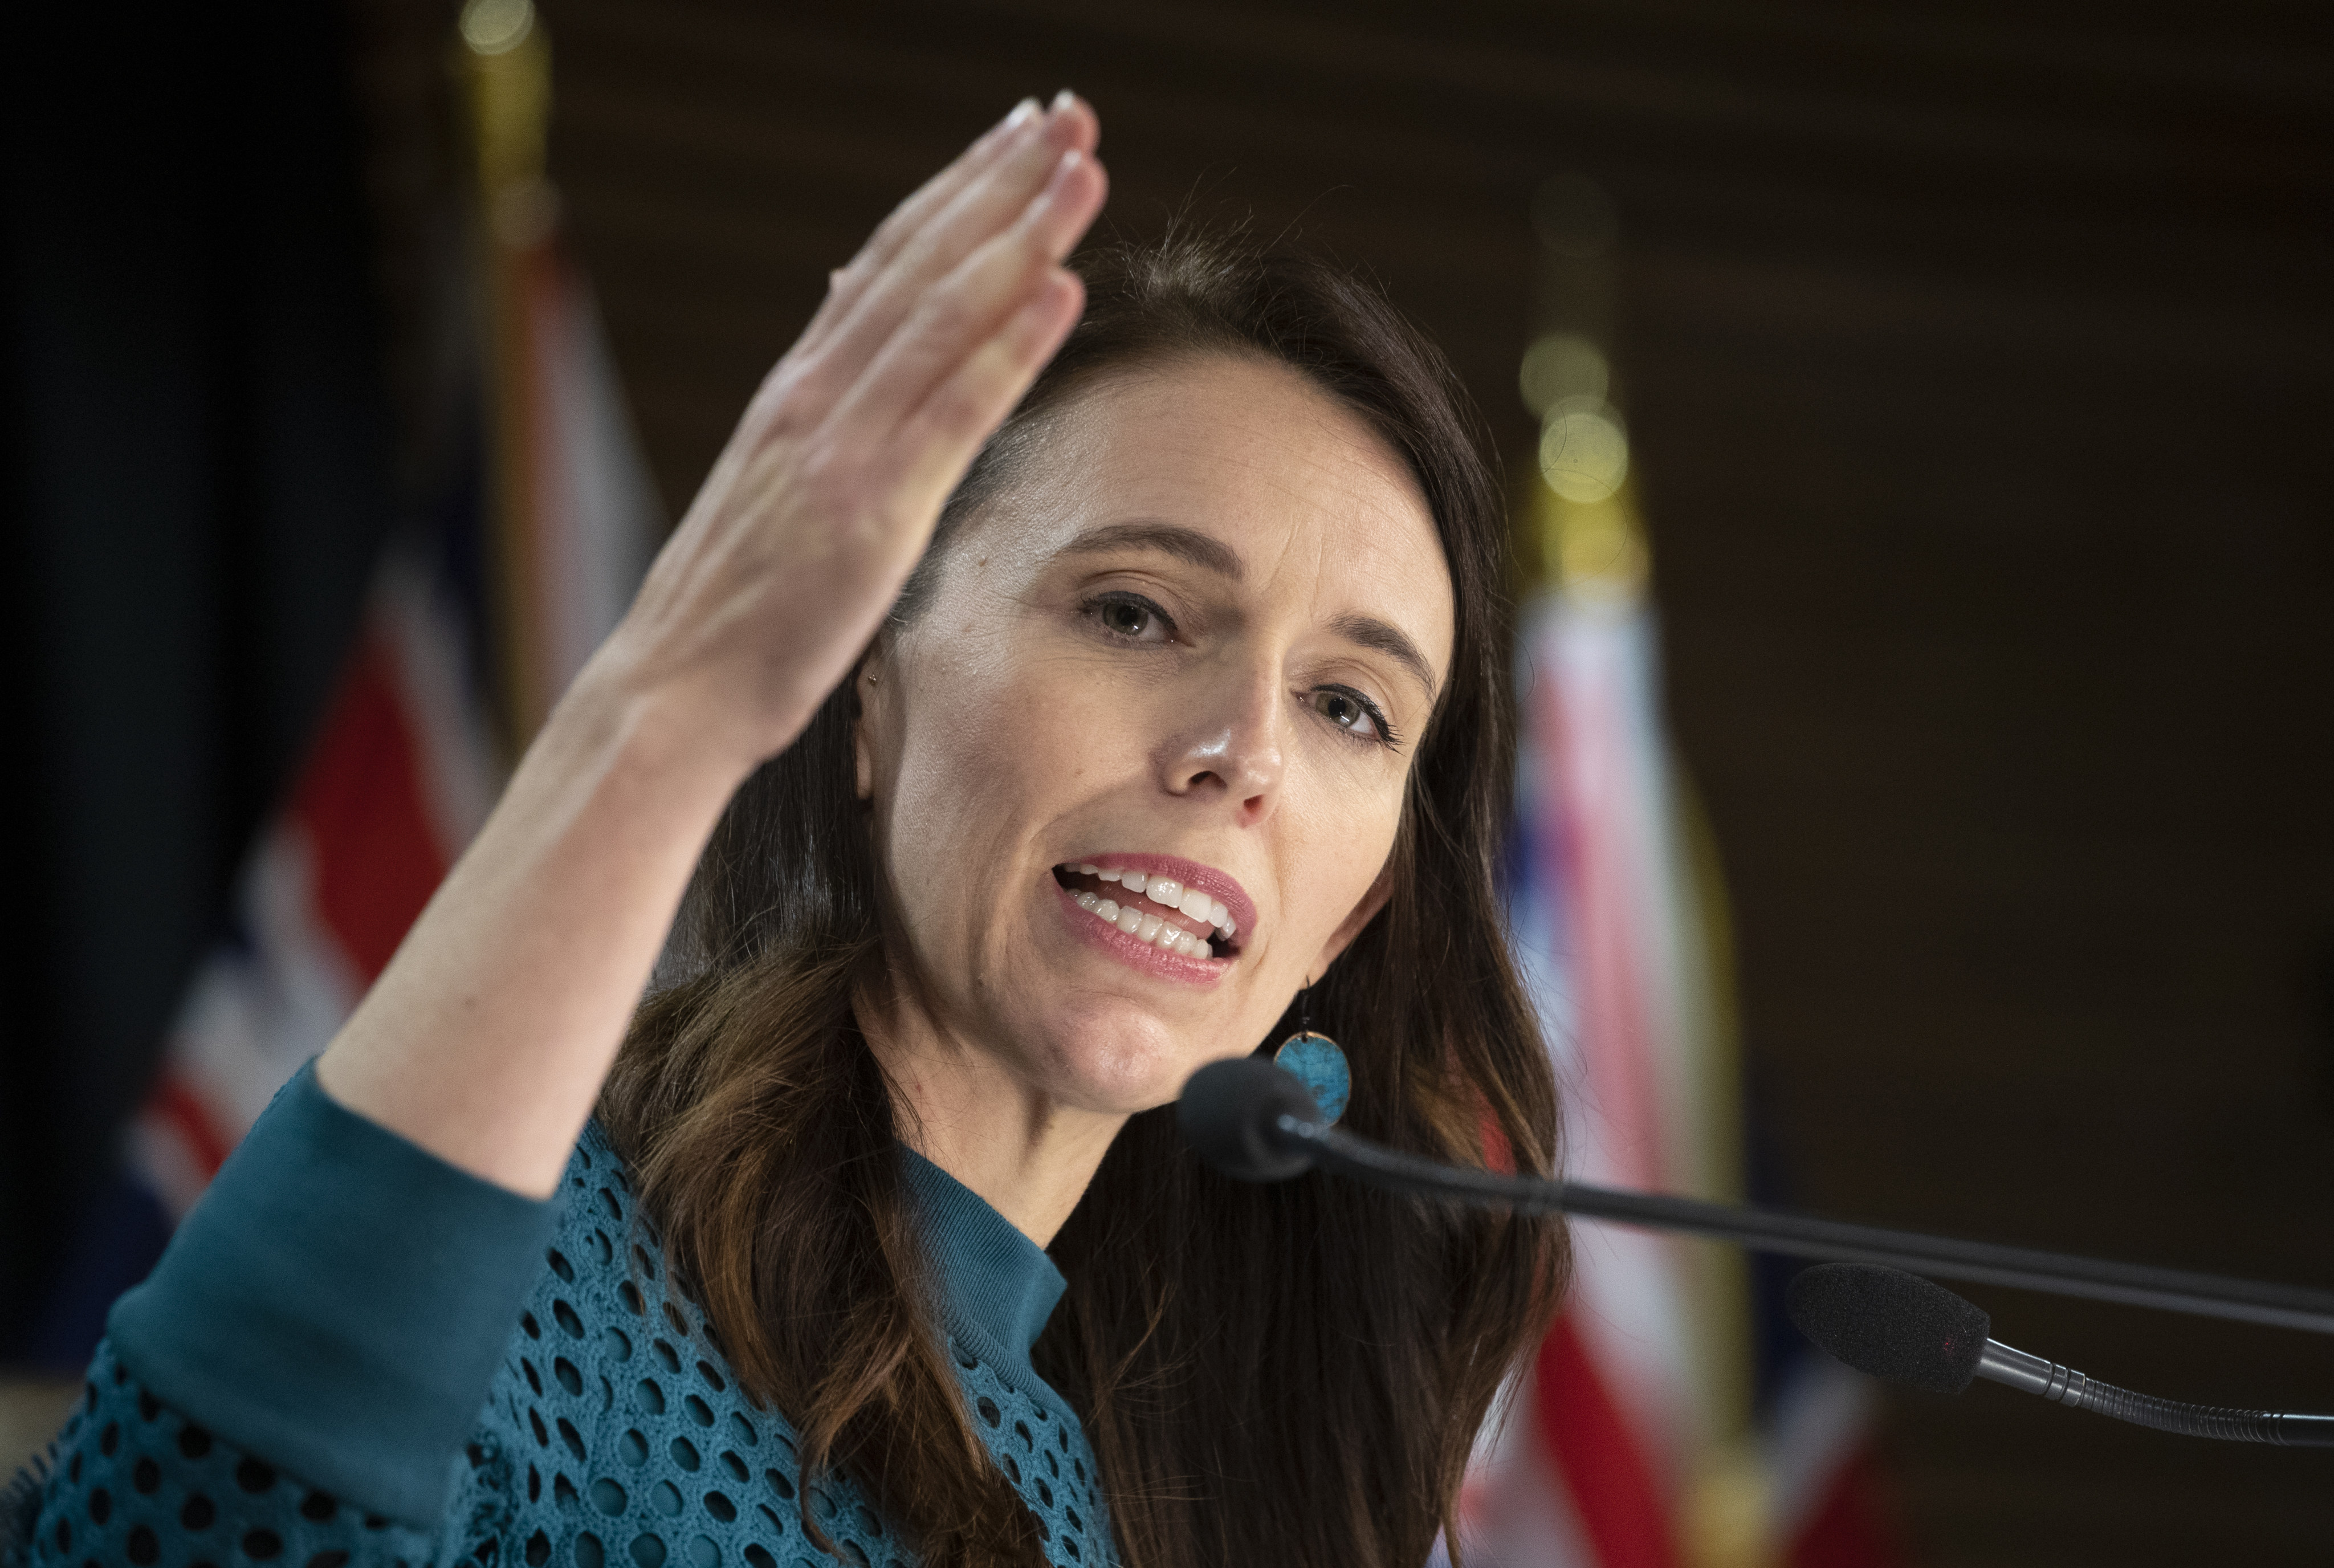 New Zealand’s Prime Minister Jacinda Ardern says Pacific nations can better rebuff China’s advances if they work collectively. Photo: The New Zealand Herald